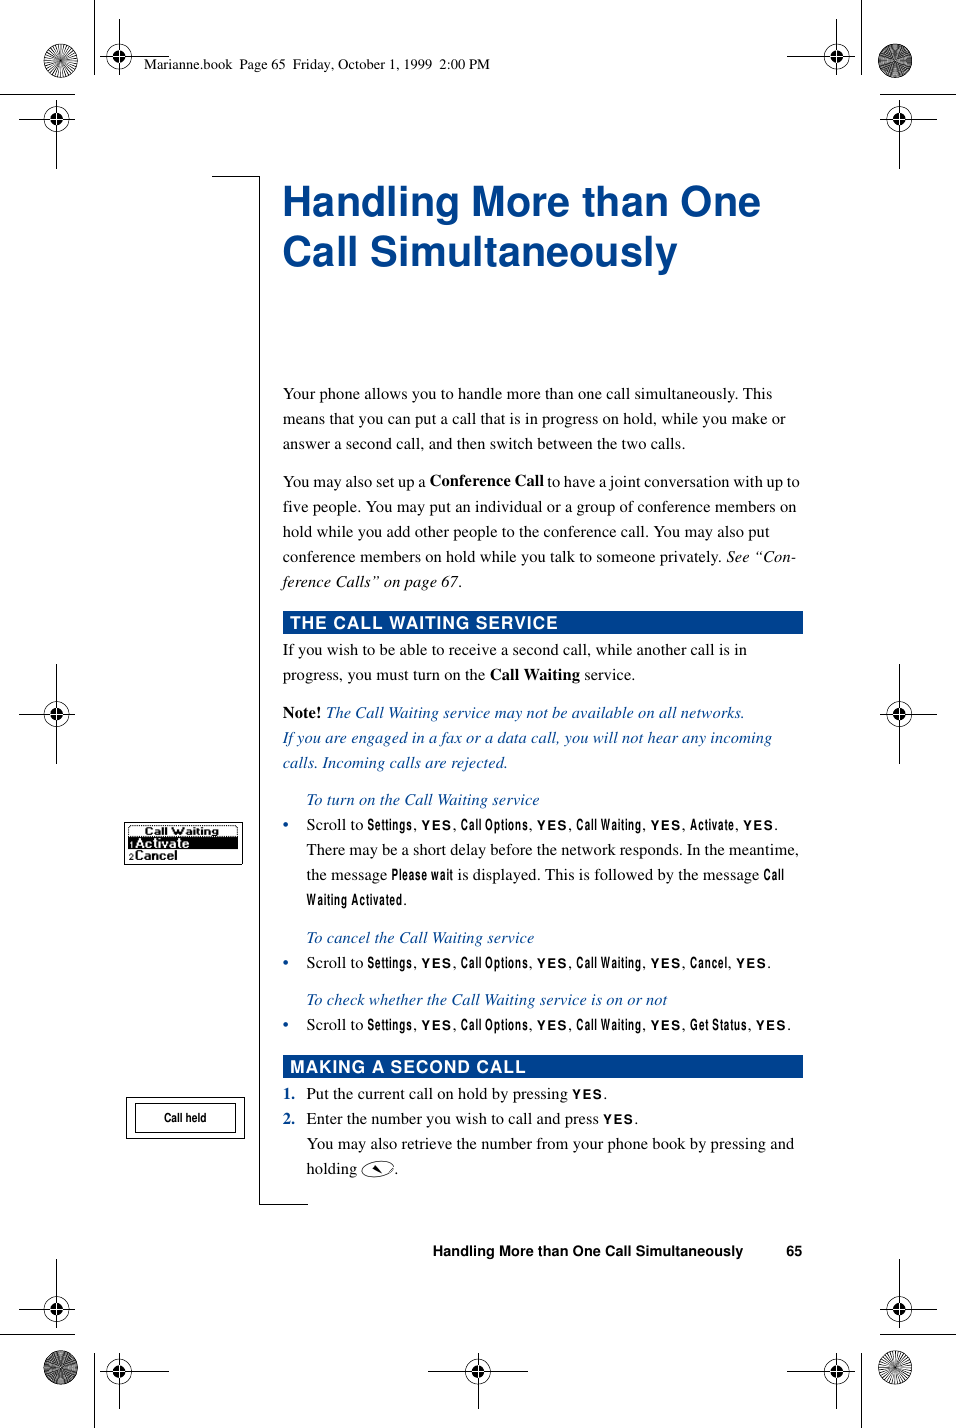 Handling More than One Call Simultaneously 65Handling More than One Call SimultaneouslyYour phone allows you to handle more than one call simultaneously. This means that you can put a call that is in progress on hold, while you make or answer a second call, and then switch between the two calls. You may also set up a Conference Call to have a joint conversation with up to five people. You may put an individual or a group of conference members on hold while you add other people to the conference call. You may also put conference members on hold while you talk to someone privately. See “Con-ference Calls” on page 67.If you wish to be able to receive a second call, while another call is in progress, you must turn on the Call Waiting service.Note! The Call Waiting service may not be available on all networks.If you are engaged in a fax or a data call, you will not hear any incoming calls. Incoming calls are rejected.To turn on the Call Waiting service•Scroll to Settings, YES, Call Options, YES, Call Waiting, YES, Activate, YES.There may be a short delay before the network responds. In the meantime, the message Please wait is displayed. This is followed by the message Call Waiting Activated.To cancel the Call Waiting service•Scroll to Settings, YES, Call Options, YES, Call Waiting, YES, Cancel, YES.To check whether the Call Waiting service is on or not•Scroll to Settings, YES, Call Options, YES, Call Waiting, YES, Get Status, YES.1. Put the current call on hold by pressing YES.2. Enter the number you wish to call and press YES.You may also retrieve the number from your phone book by pressing and holding é.THE CALL WAITING SERVICEMAKING A SECOND CALLCall heldMarianne.book  Page 65  Friday, October 1, 1999  2:00 PM